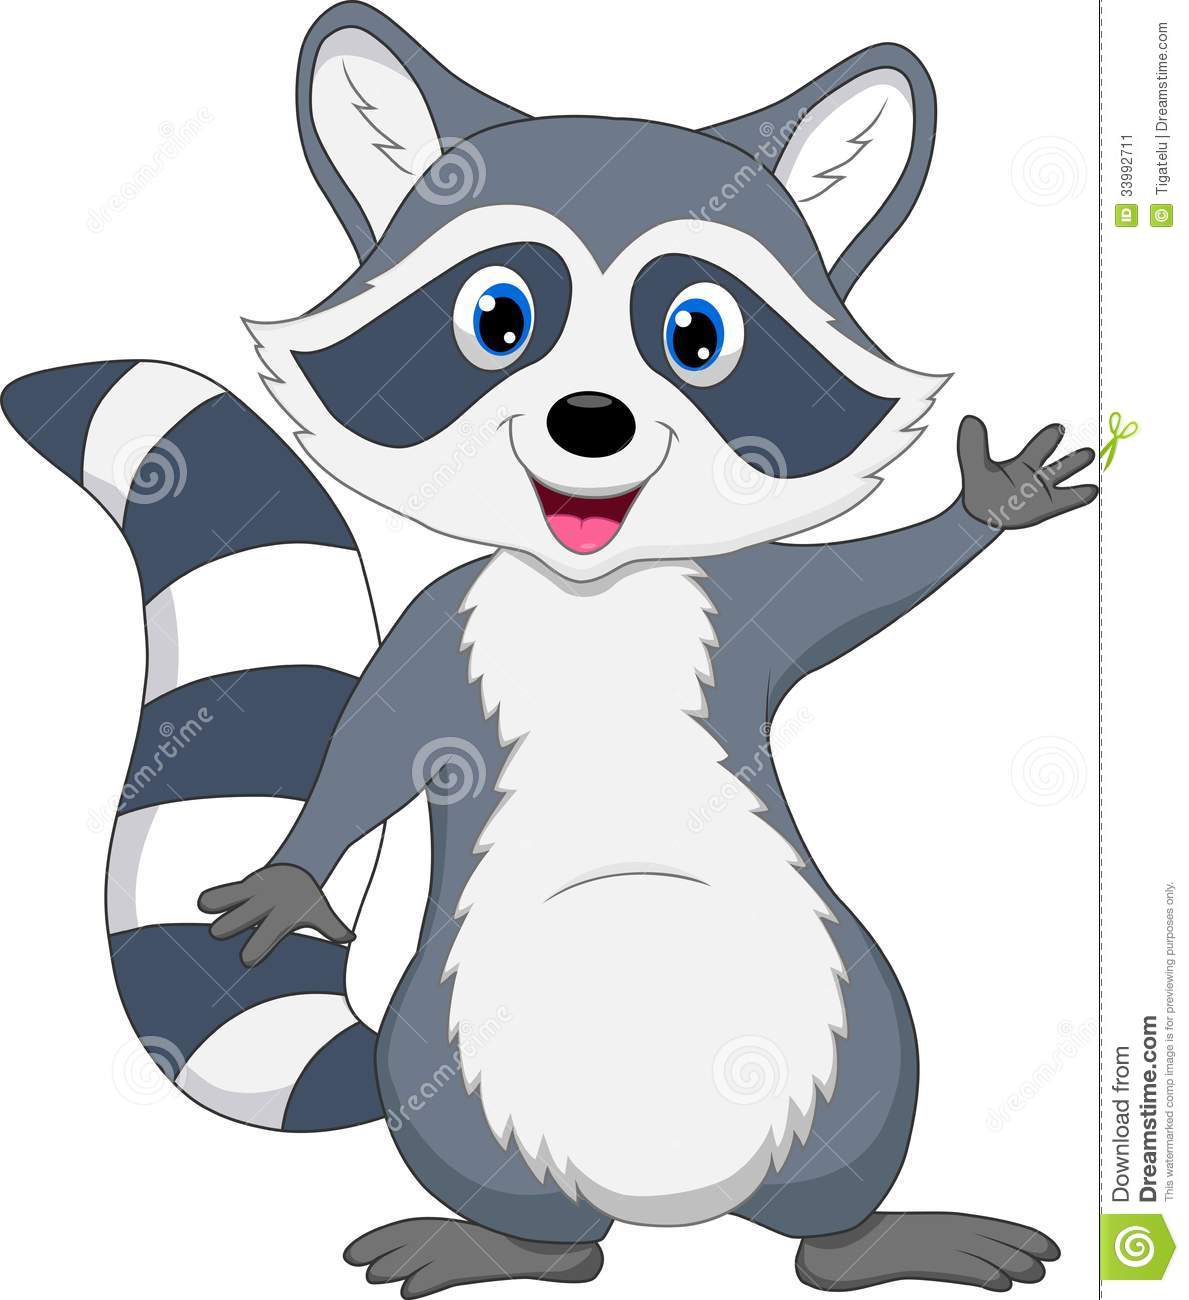 Racoon clipart #16, Download drawings